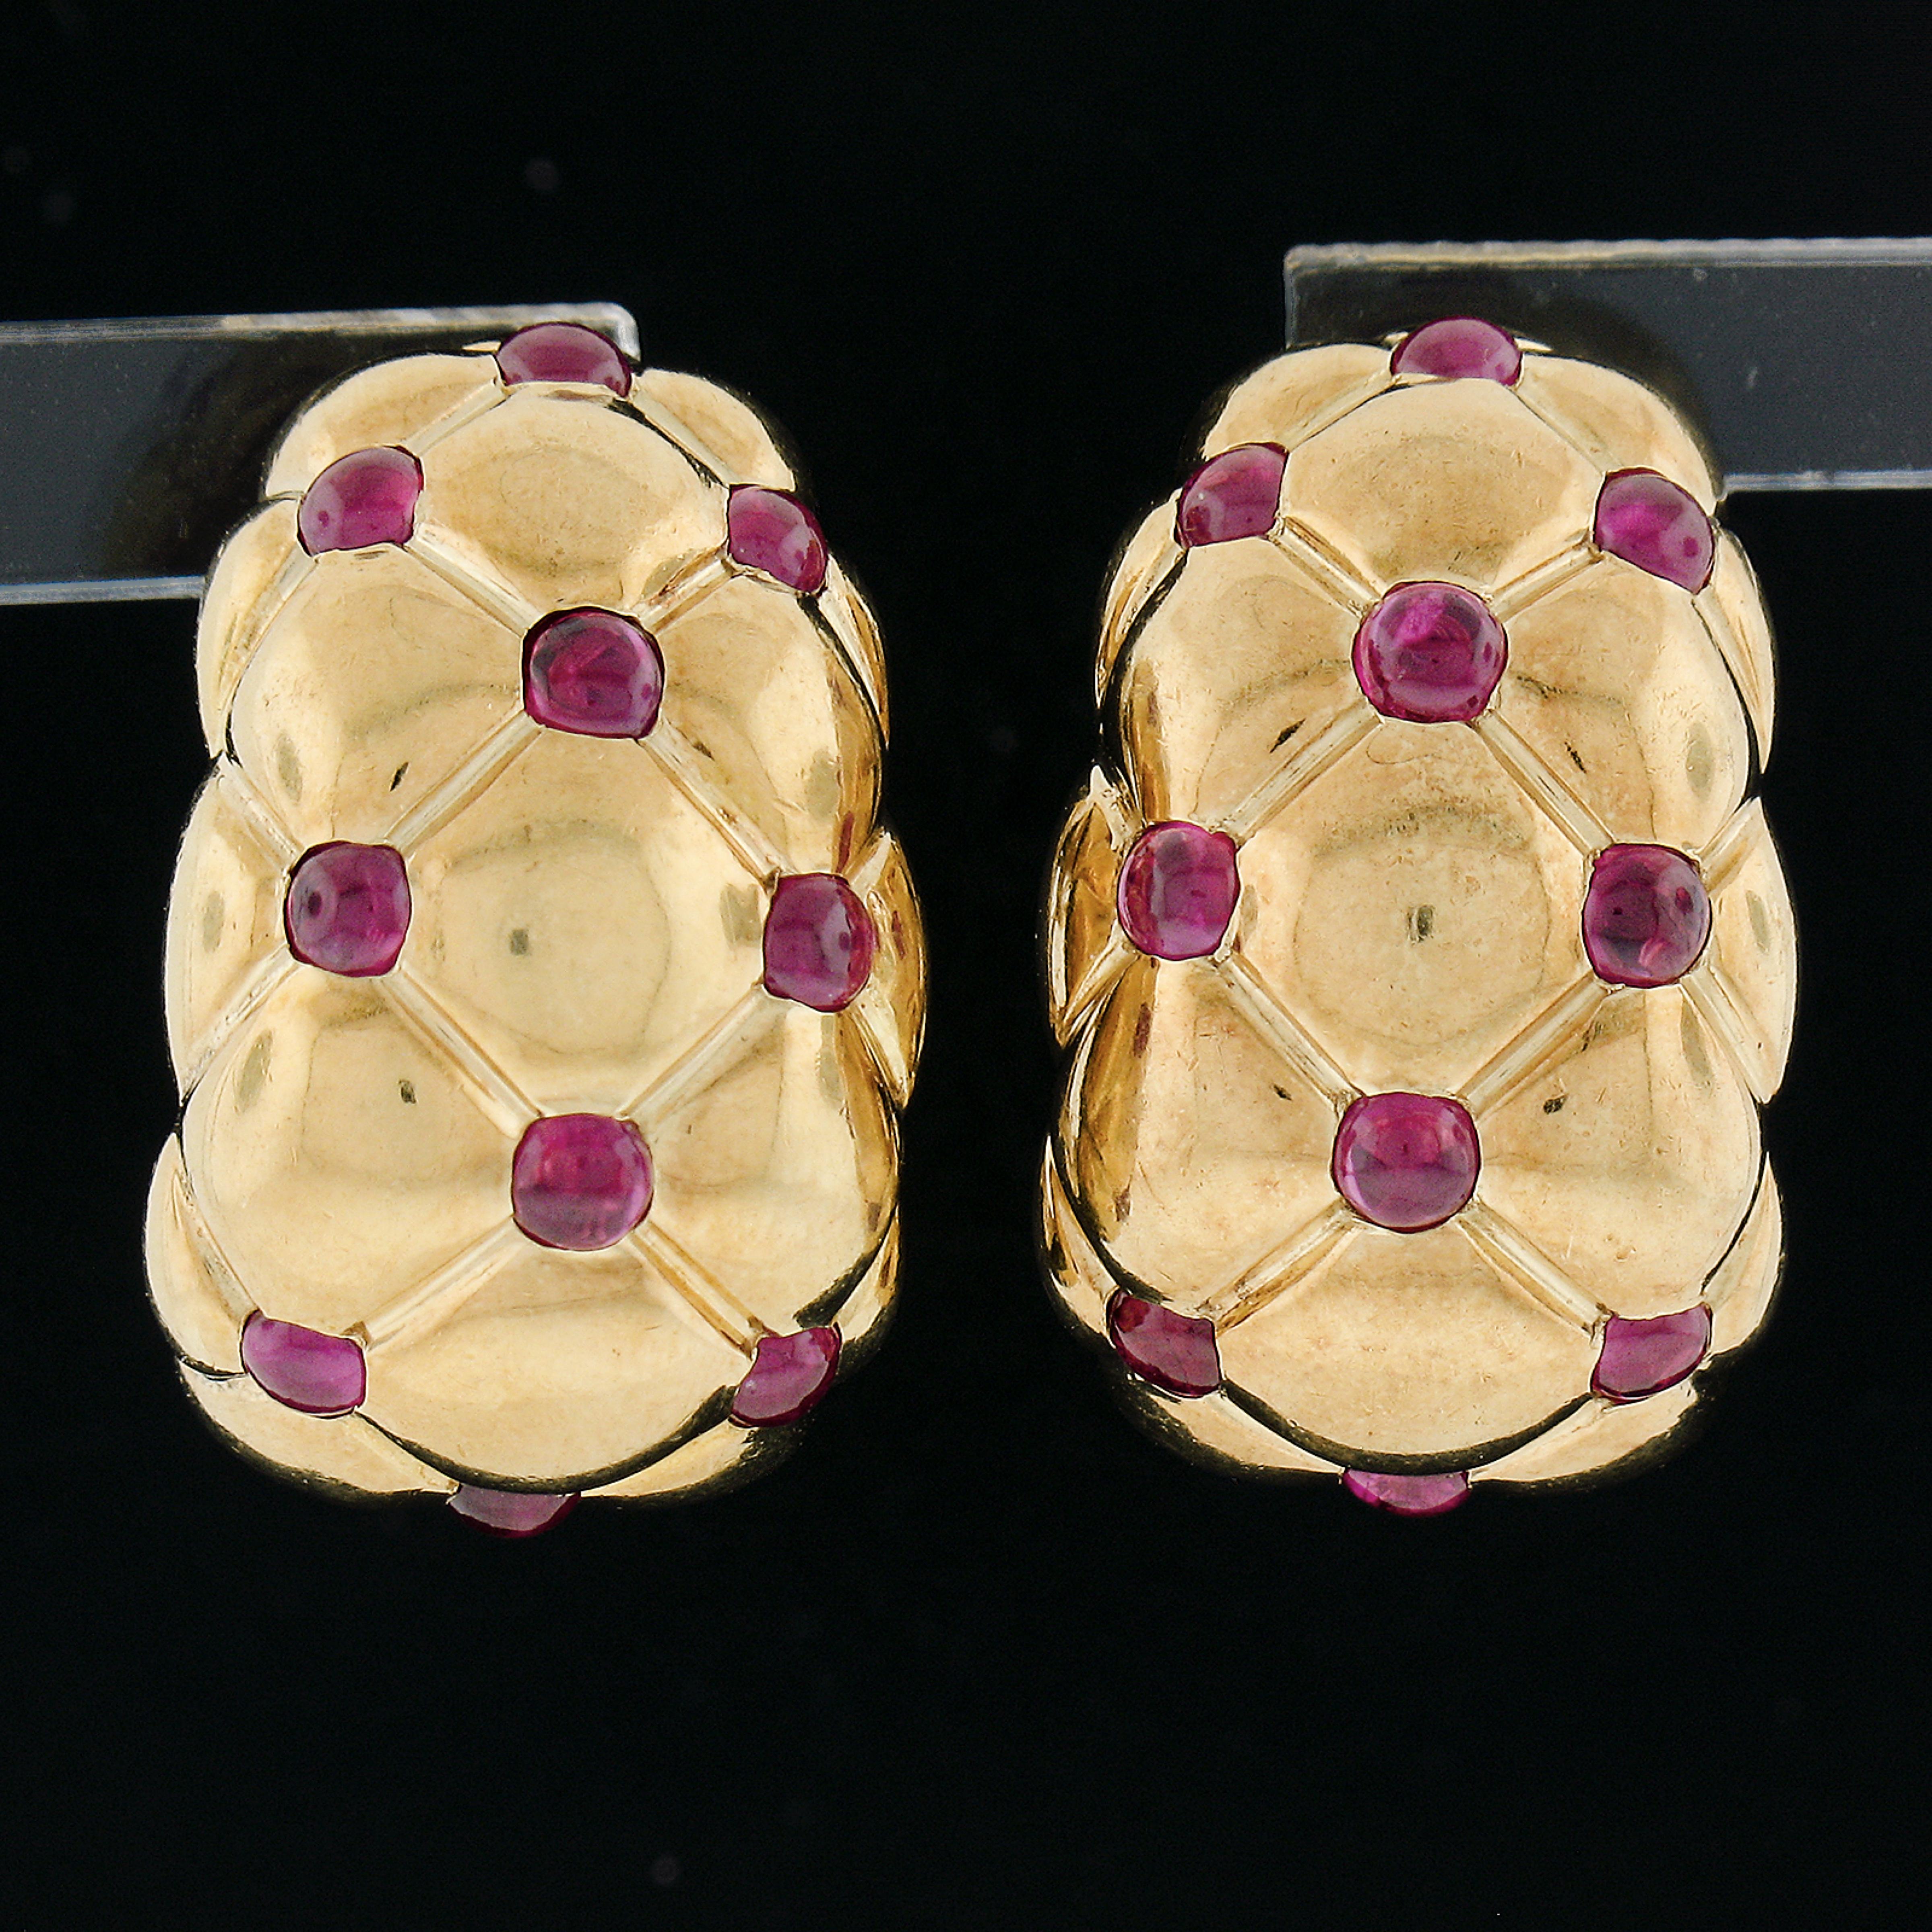 --Stone(s):--
(20) Natural Genuine Rubies - Round Cabochon Cut - Flush/Burnish Set - Vivid Deep Red Color - 2.3mm each (approx.)

Material: 18K Solid Yellow Gold
Weight: 14.54 Grams
Backing: Post Backings w/ Omega Closures (pierced ears are